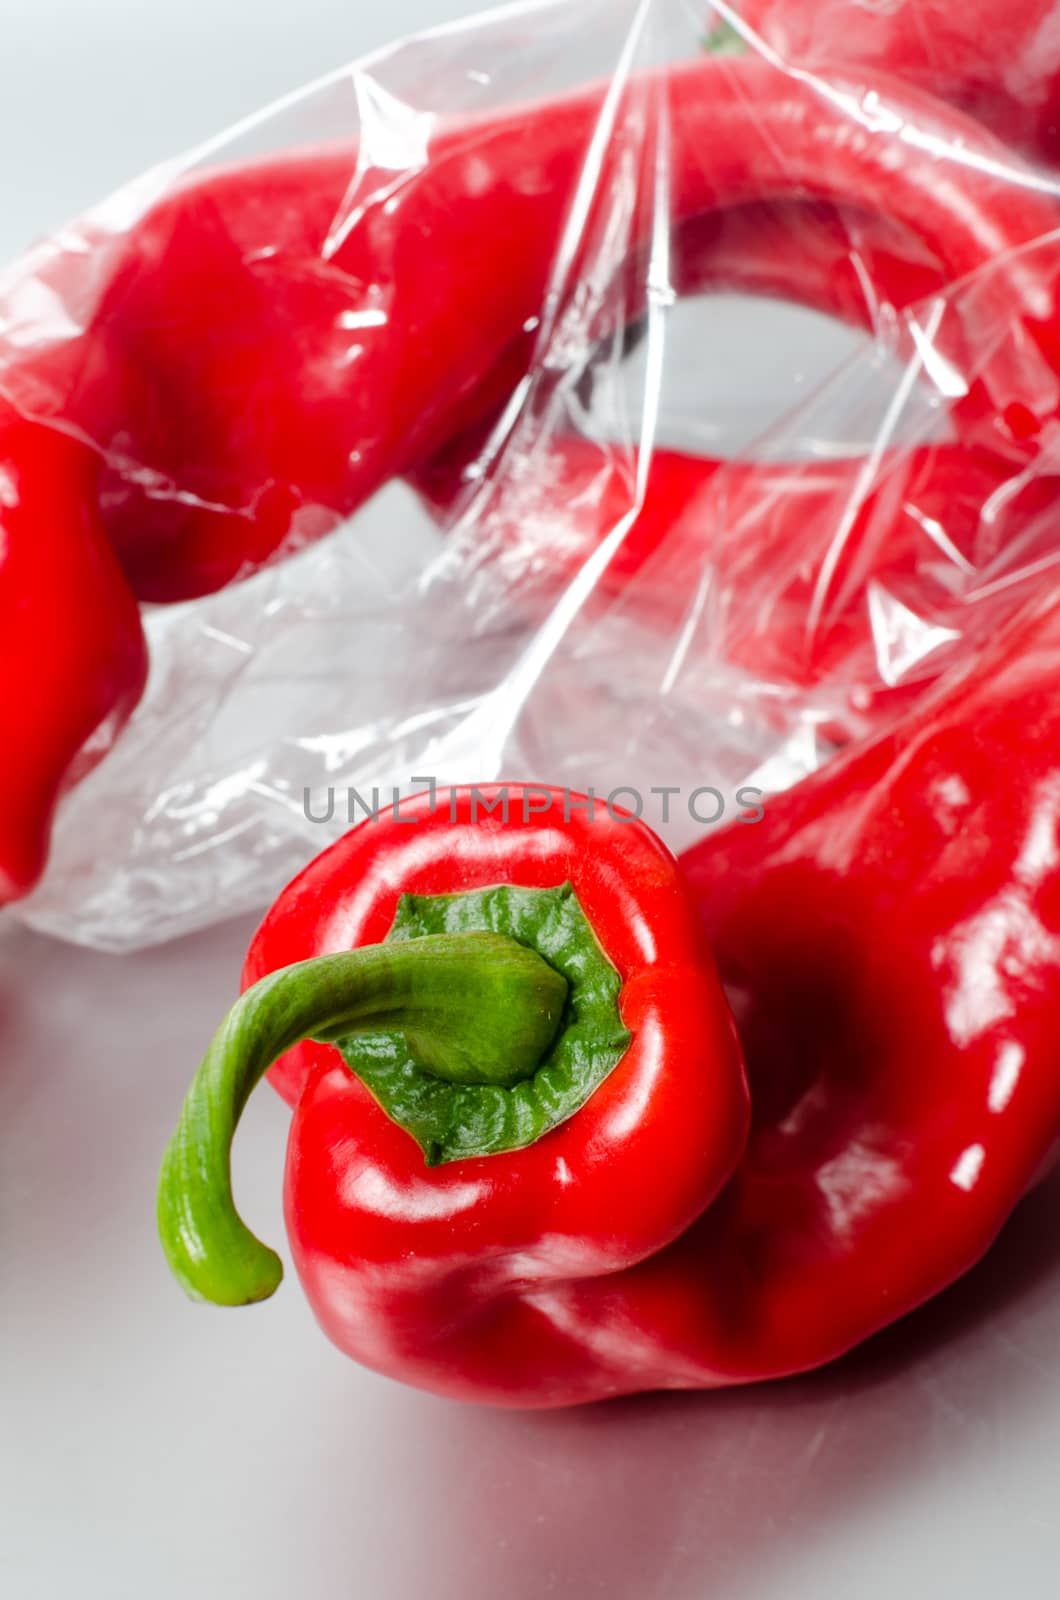 bag of peppers by sarkao